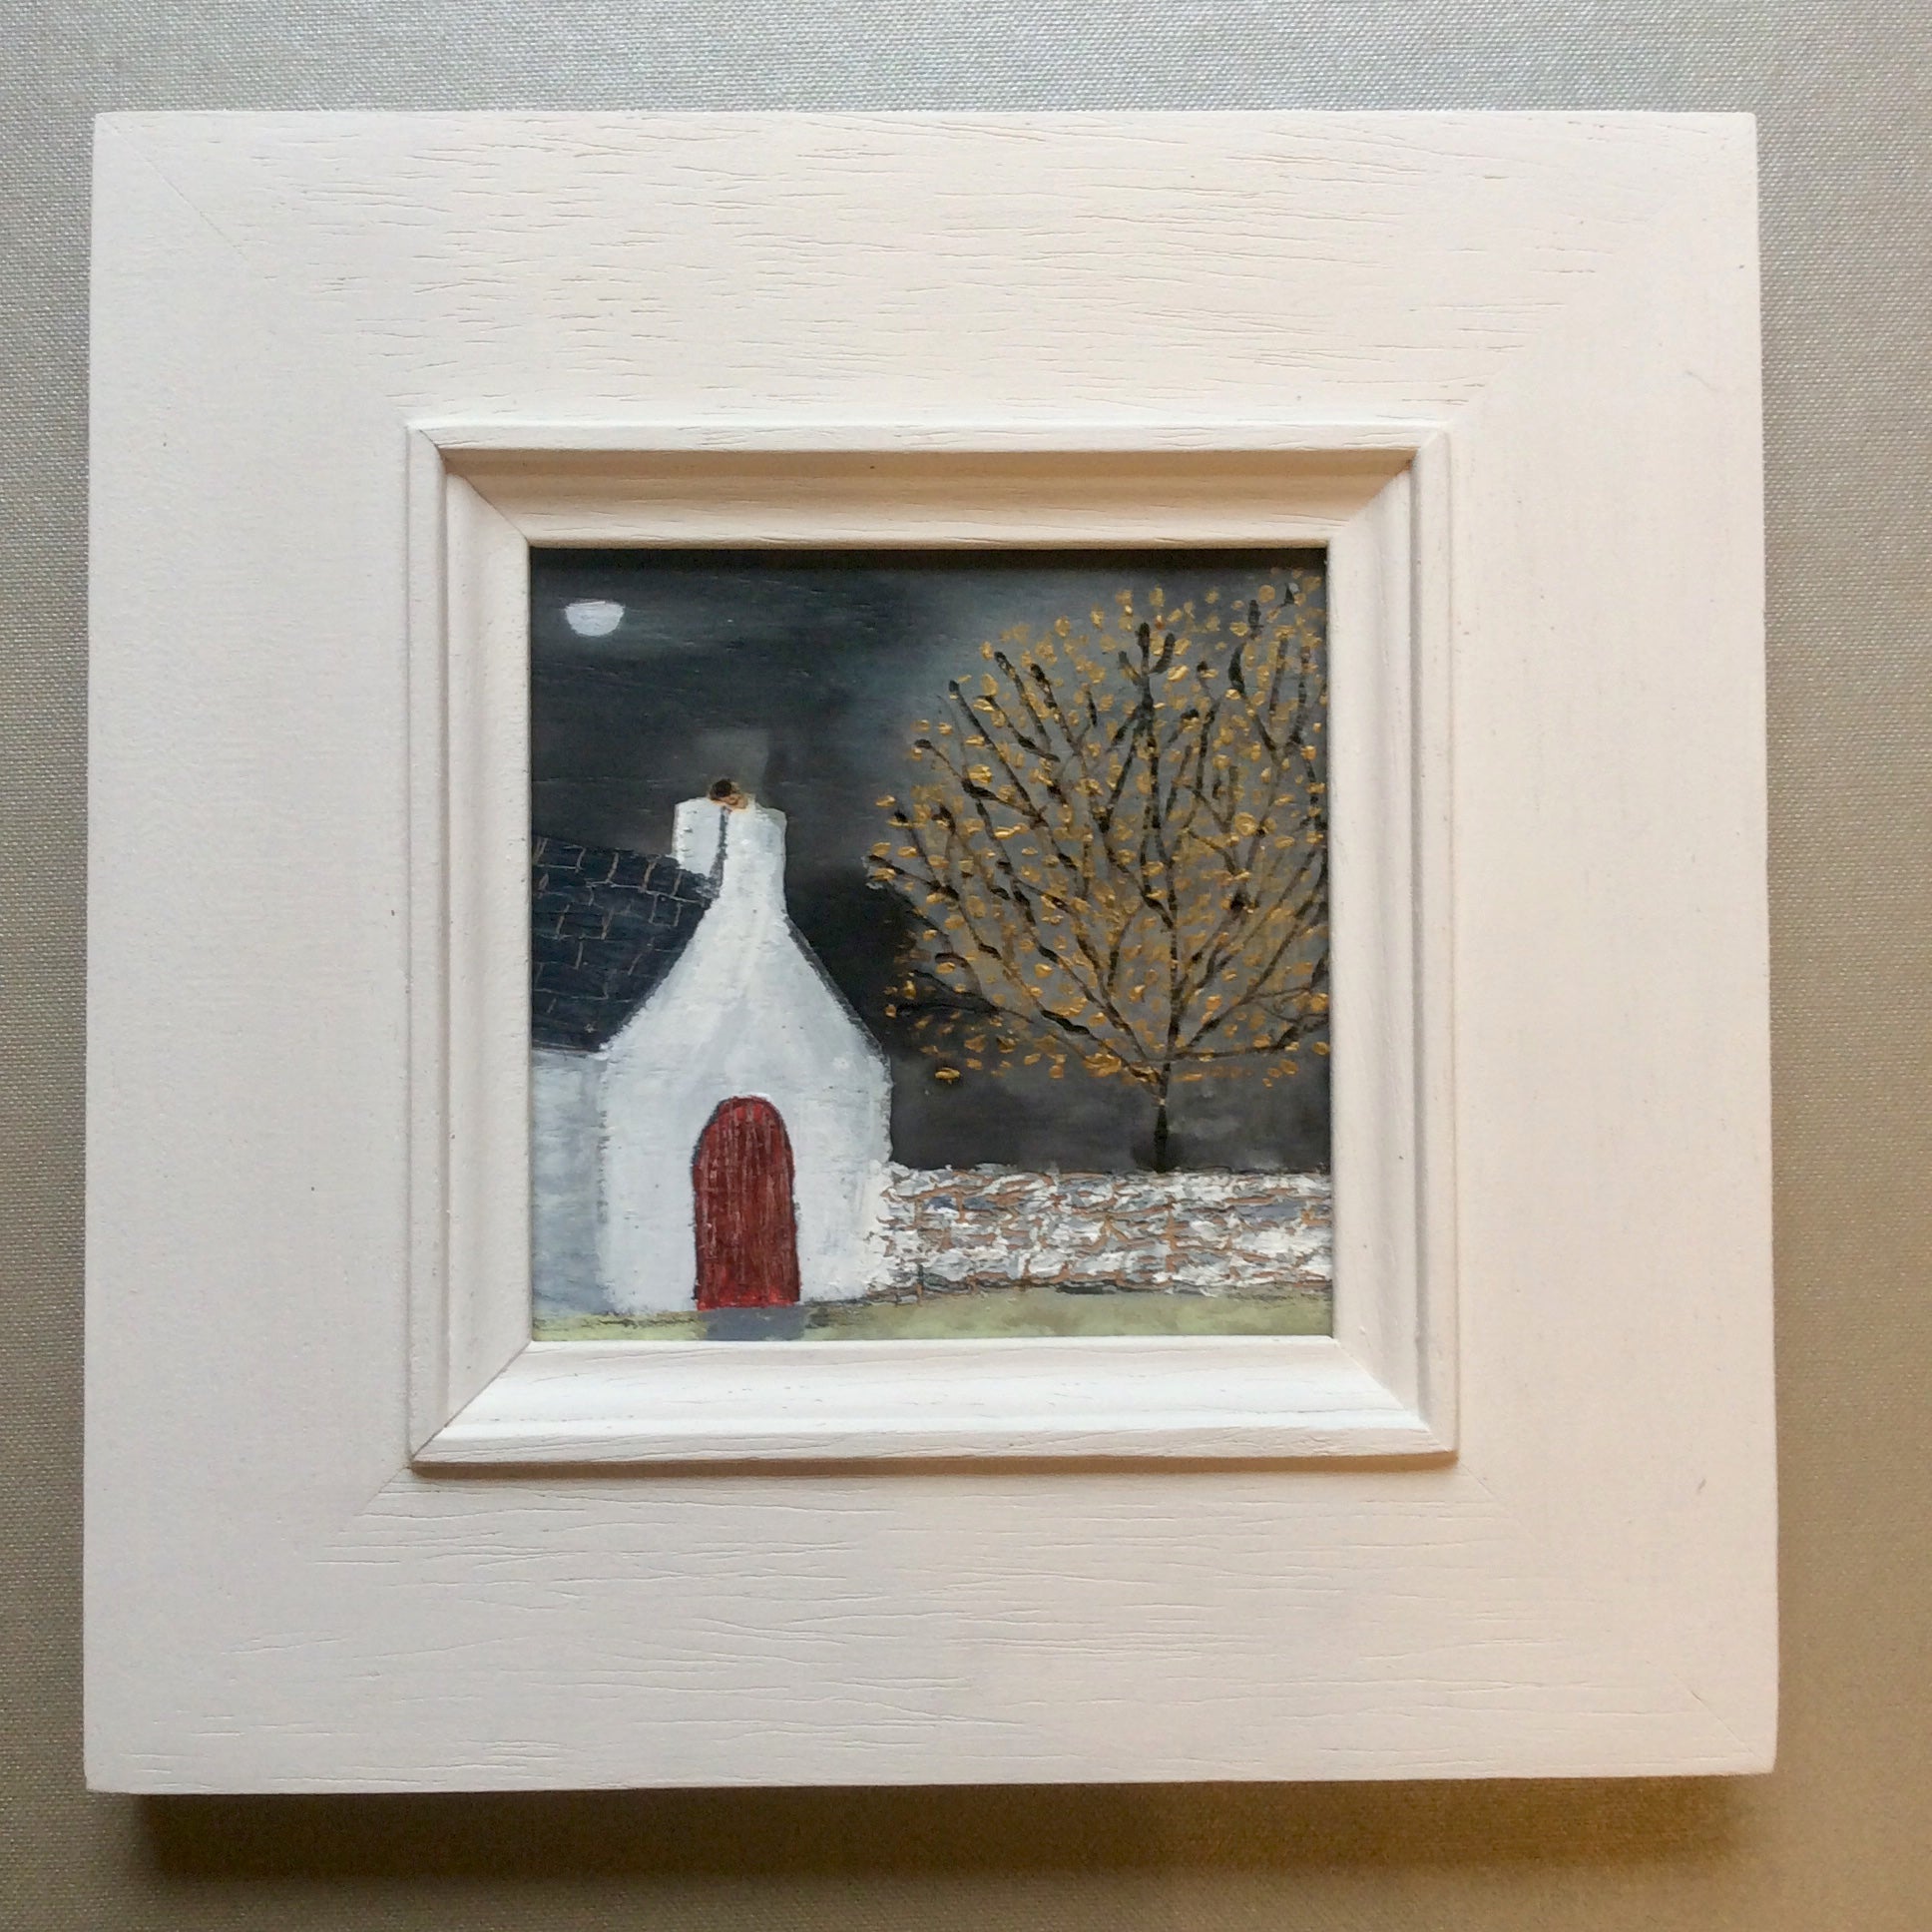 Mixed Media Art on wood By Louise O'Hara - "The Old chapel”